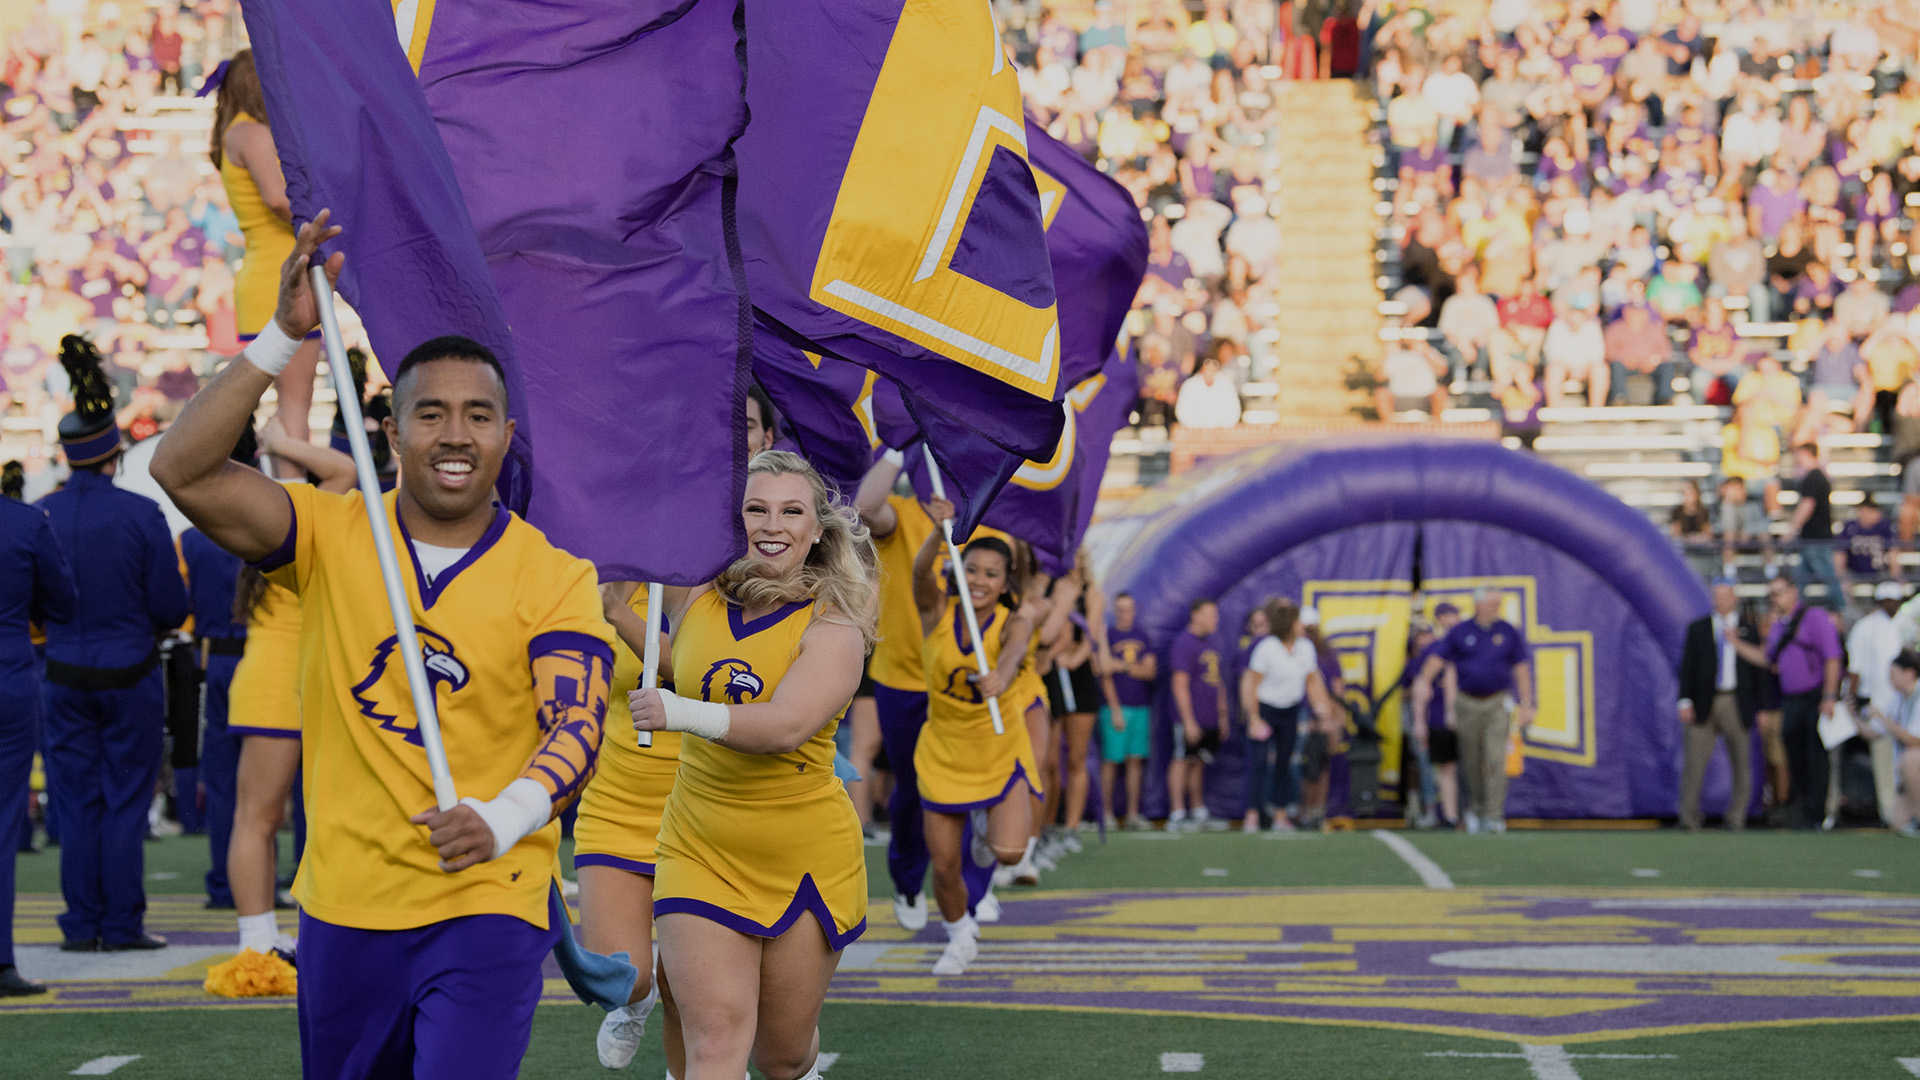 Students running with Tennessee Tech banners